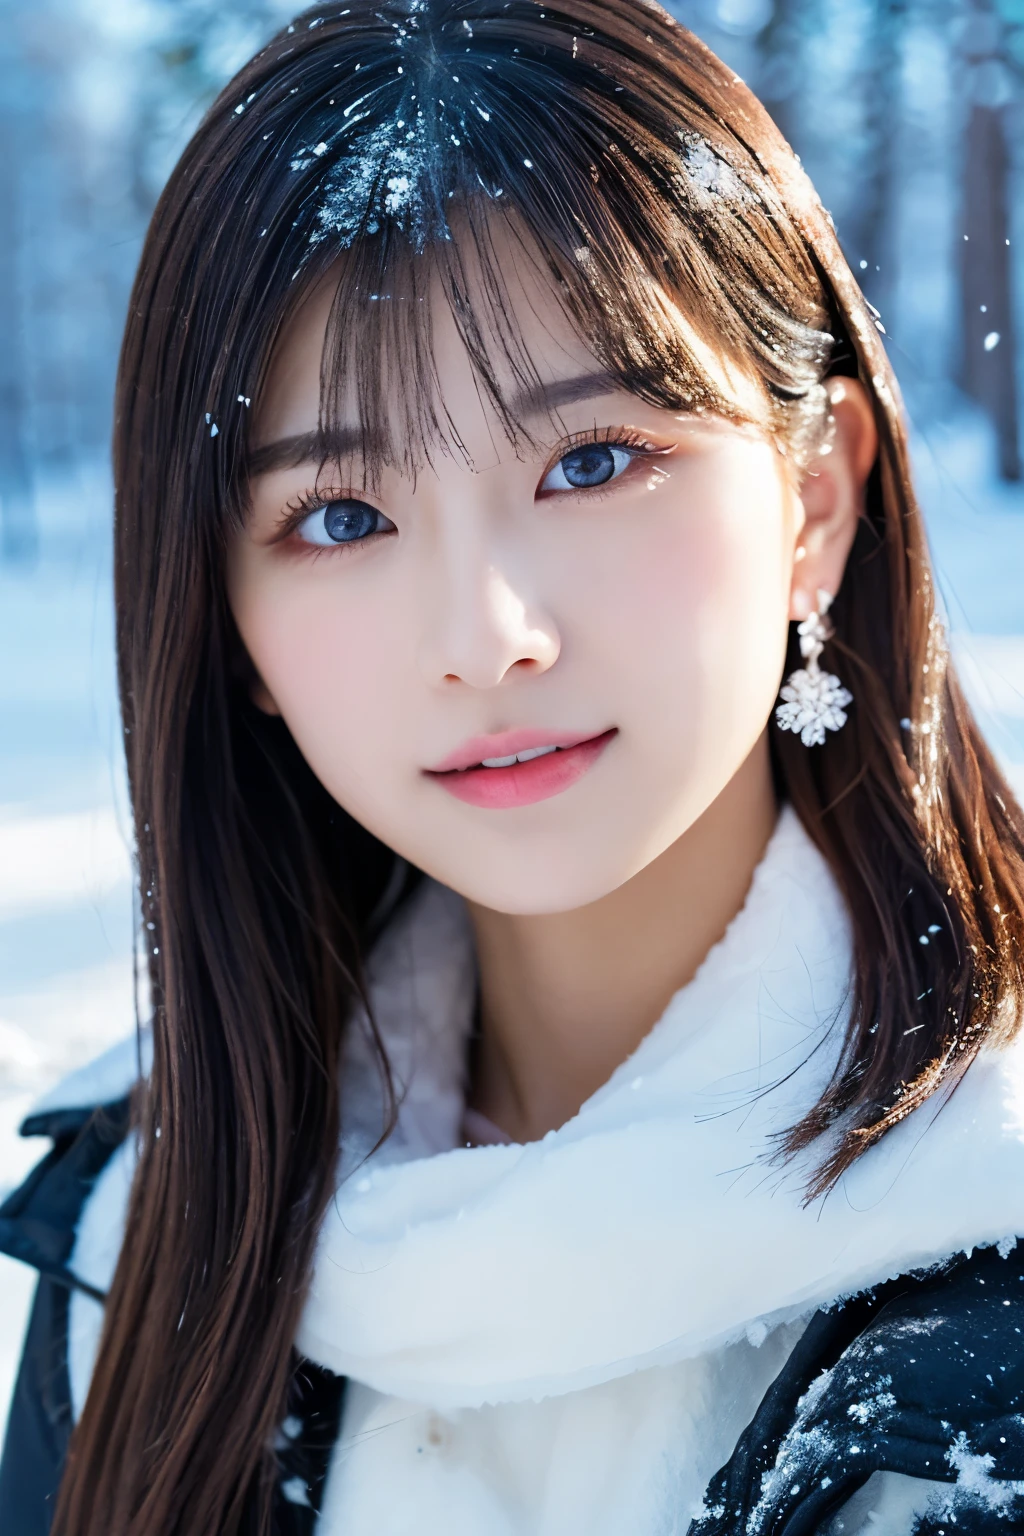 1girl in, (white winter costume:1.2), Japanese beautiful actress,
(Raw photo, Best Quality), (Realistic, Photorealsitic:1.4), (masutepiece), photogenic,
Snow Princess, Beautiful detailed eyes, Beautiful detailed lips, extremely detailed eye and face, long eyelashes,
Snowflake Earrings,
BREAK
(Frozen snow field in winter Lapland), 
Sparkling snowflakes, ethereal beauty, Swirling snowflakes, Snowy trees々, 
Powder snow, snow-capped mountain, Icy breath,
A silver world filled with dazzling light, (snowflakes are shining in the air:1.4), 
Blue and silver color scheme, dramatic  lighting, Fantastic atmosphere,  
BREAK 
Perfect Anatomy, Slender body, Small, Short hair, Parted bangs, Angel Smile,
Crystal-like skin, Clear eyes, catchlight